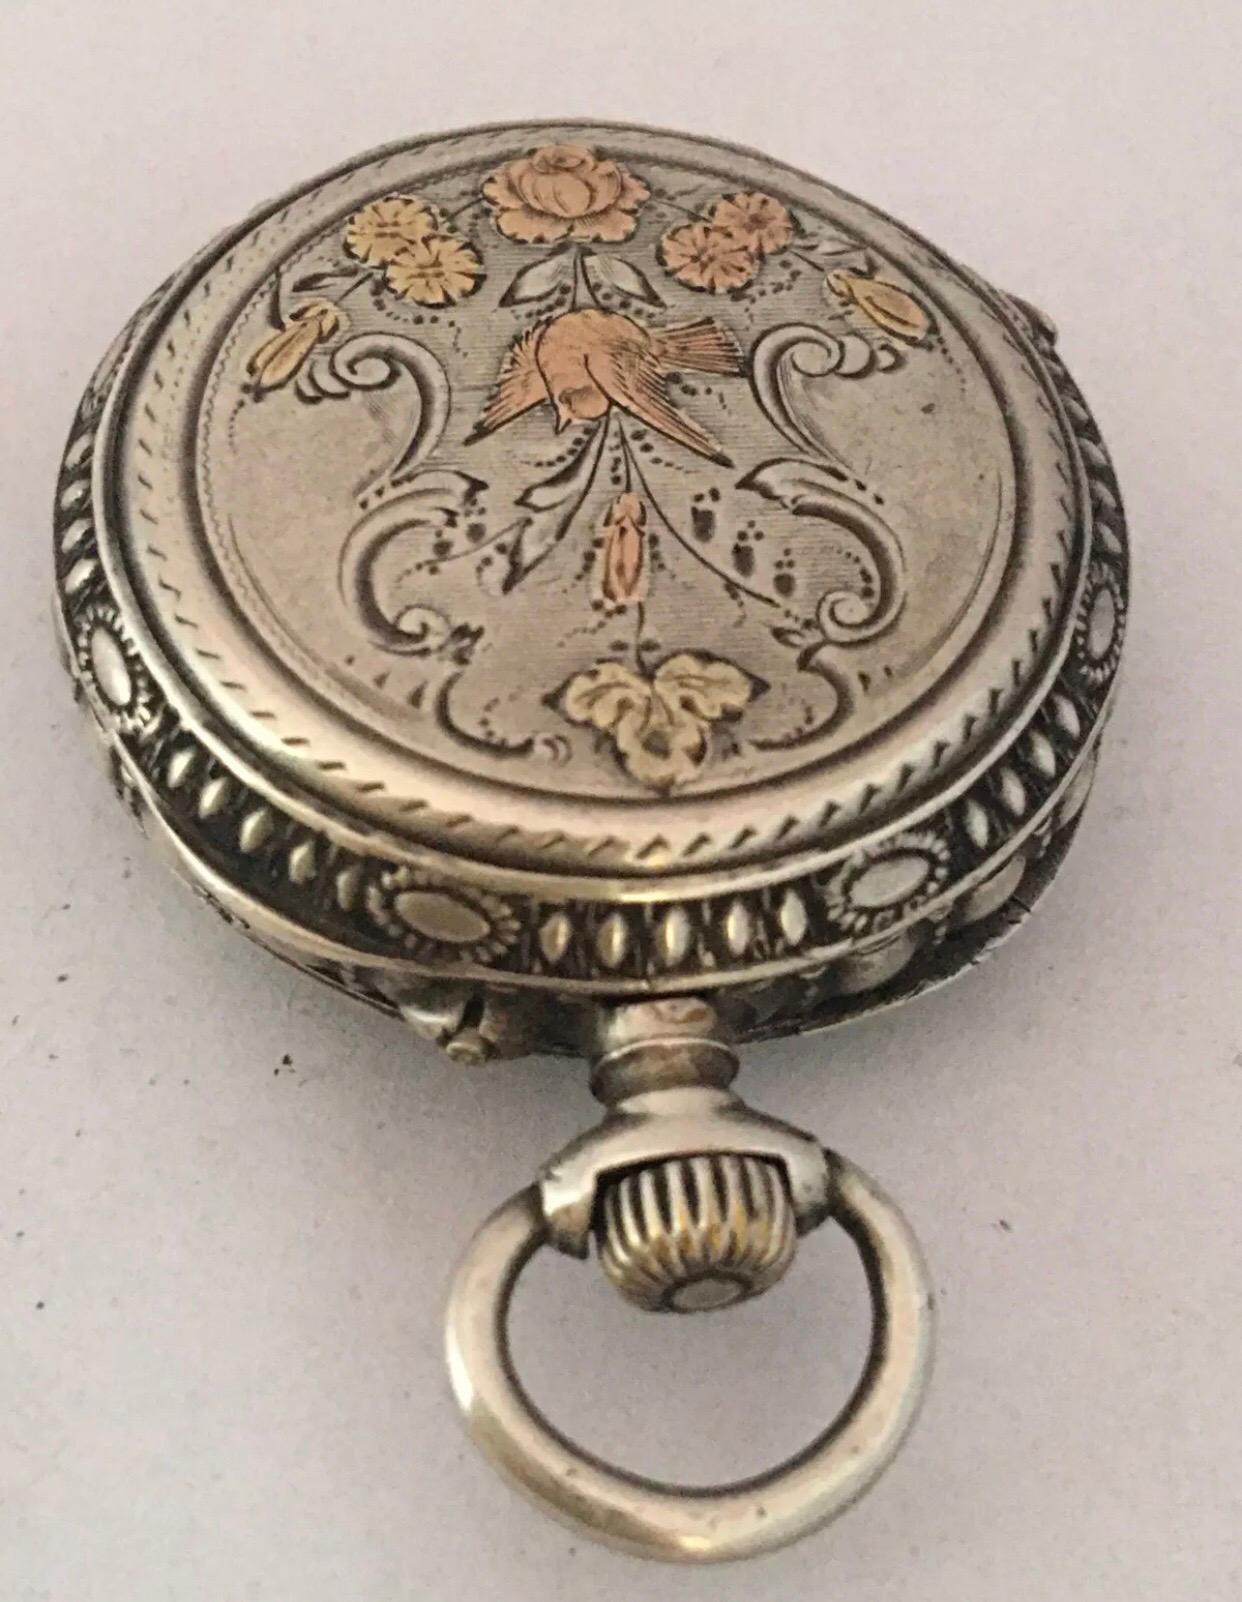 Antique Small Hand Winding Ornate Silver Fob / Pendant Watch For Sale 8